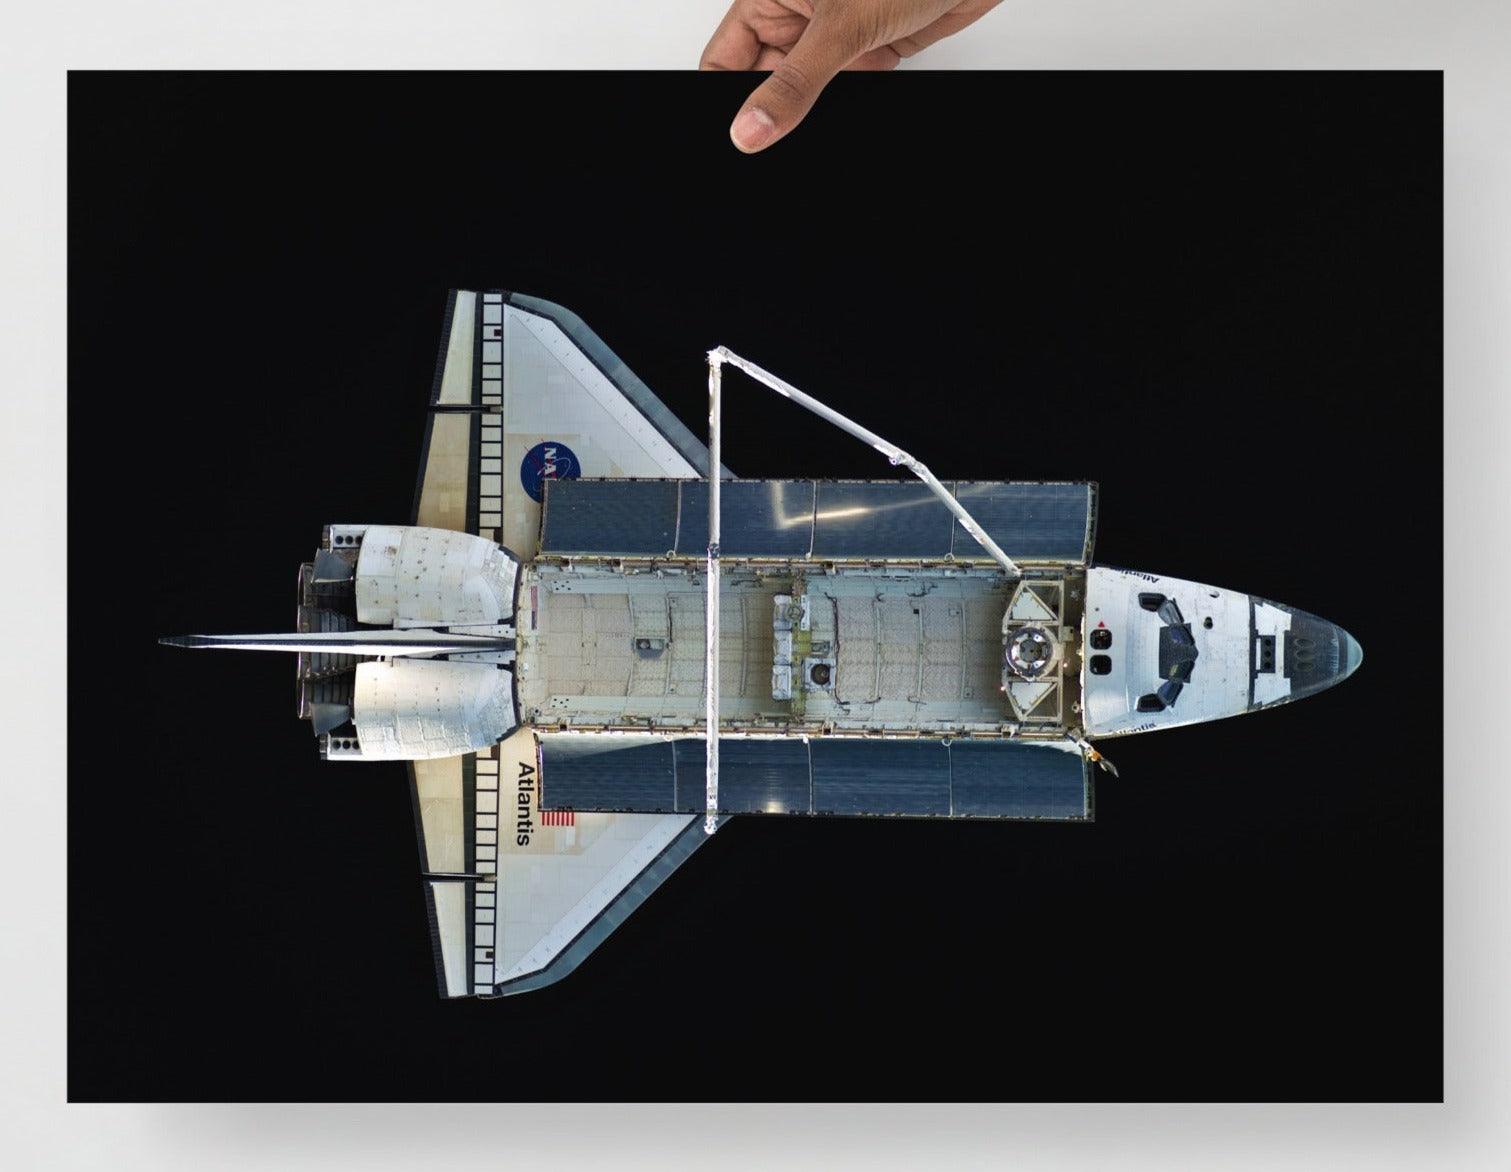 A Space Shuttle Atlantis poster on a plain backdrop in size 18x24”.